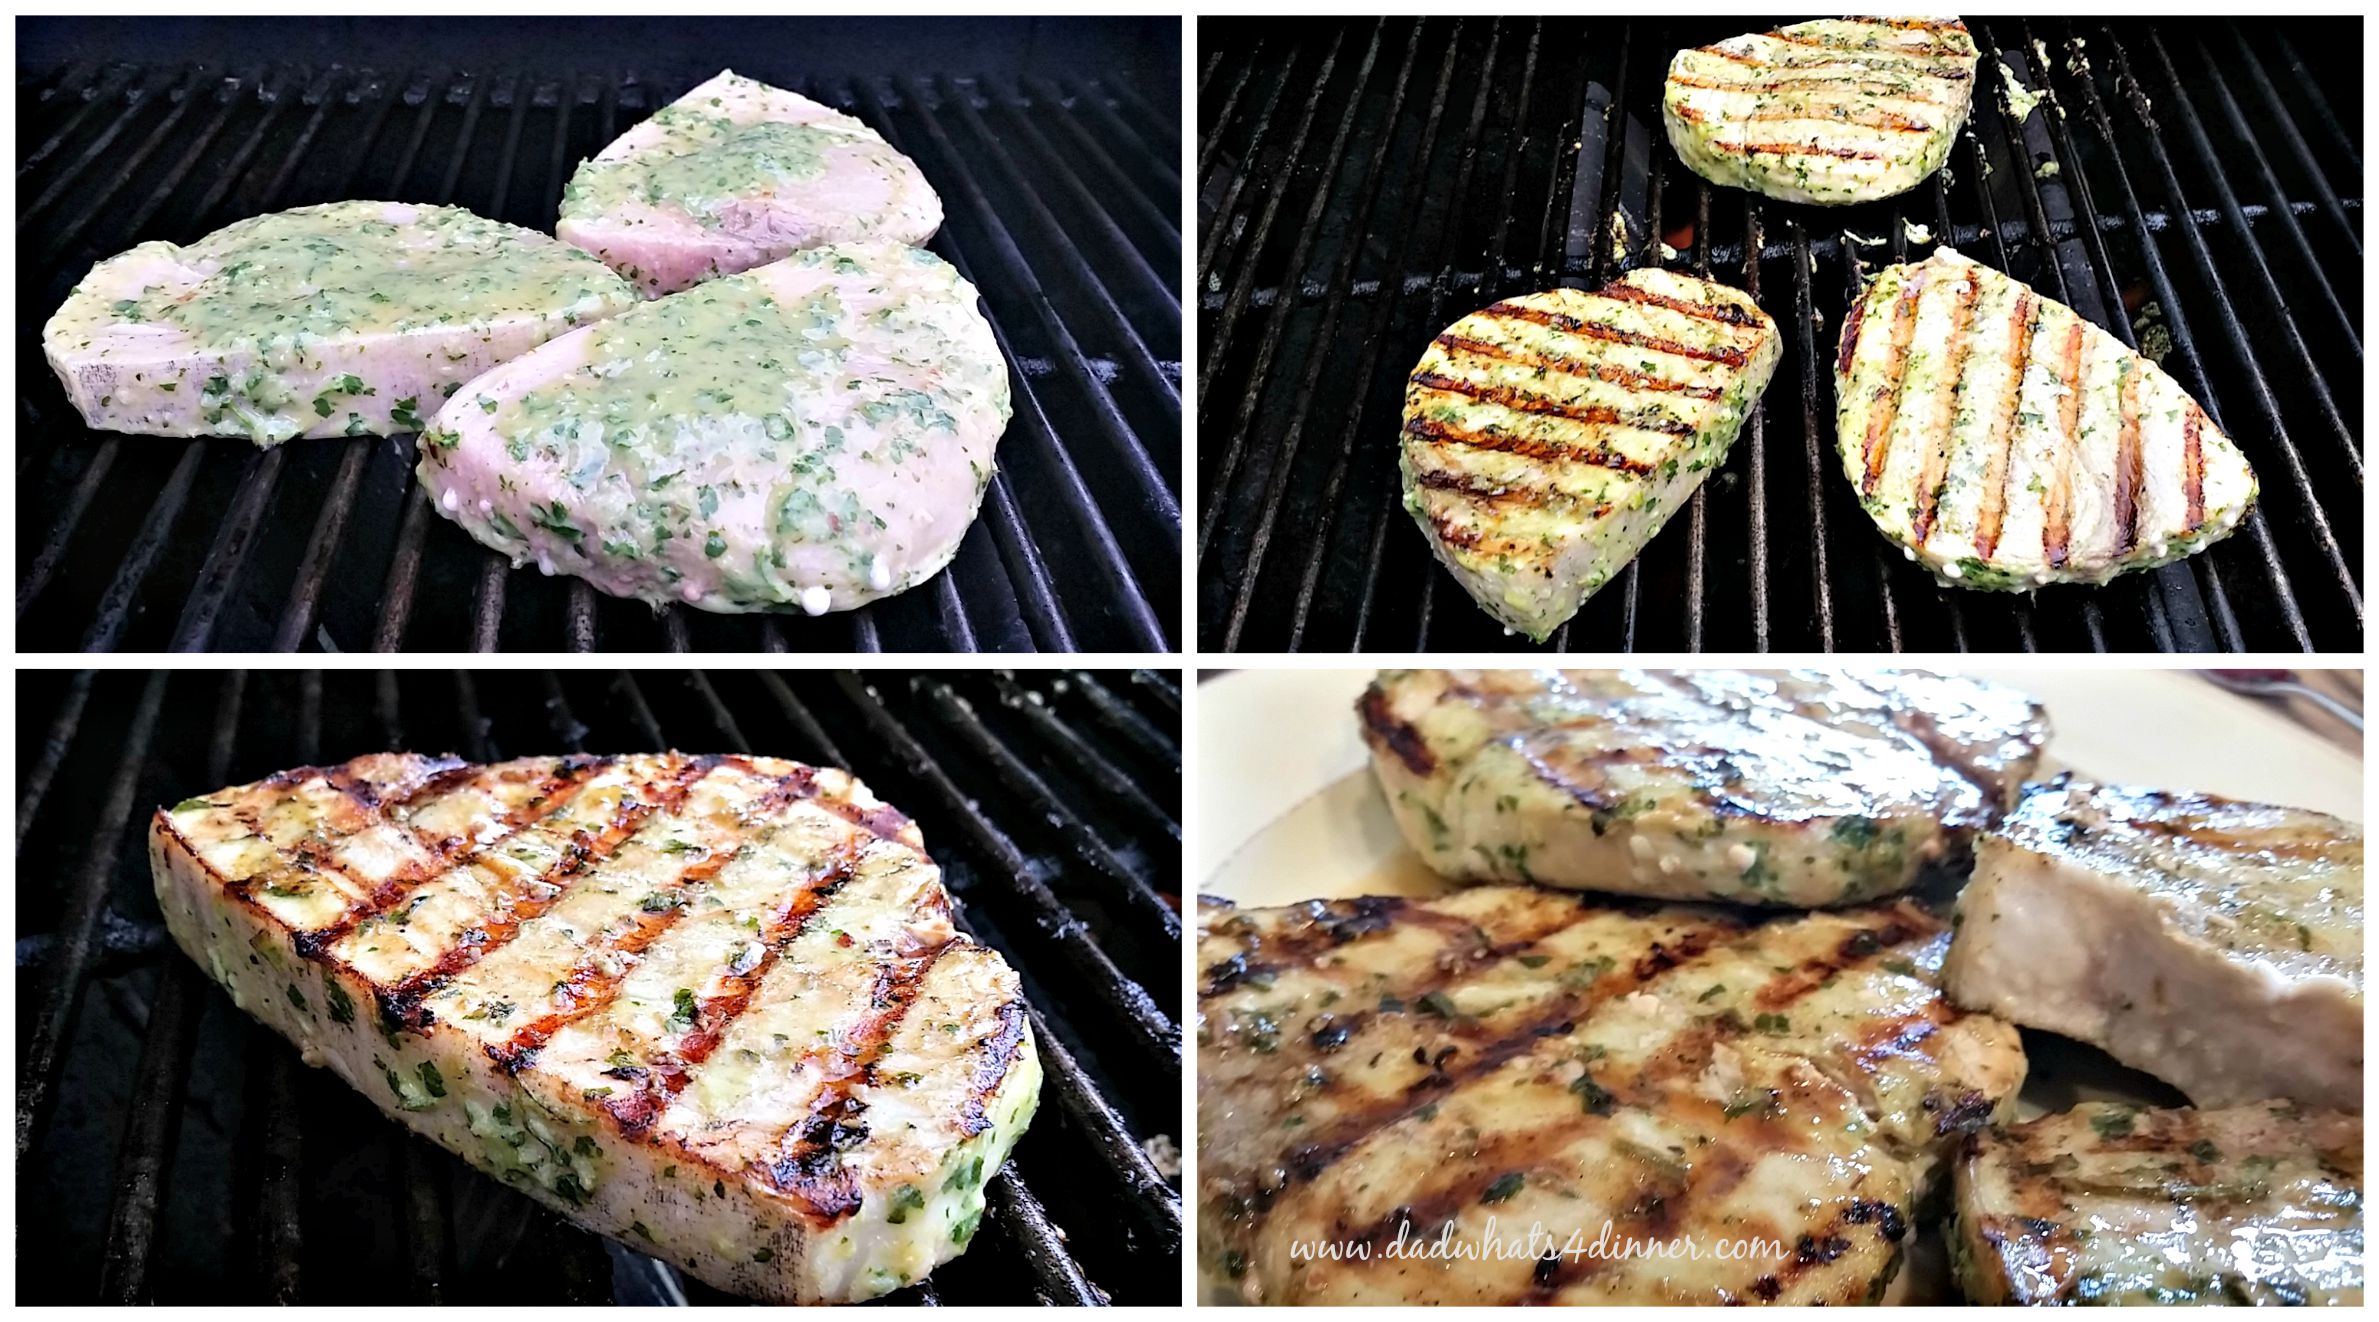 Grilled Swordfish with Chimichurri Sauce is a simple healthy grilling recipe bursting with bold flavors of the Chimichurri sauce!